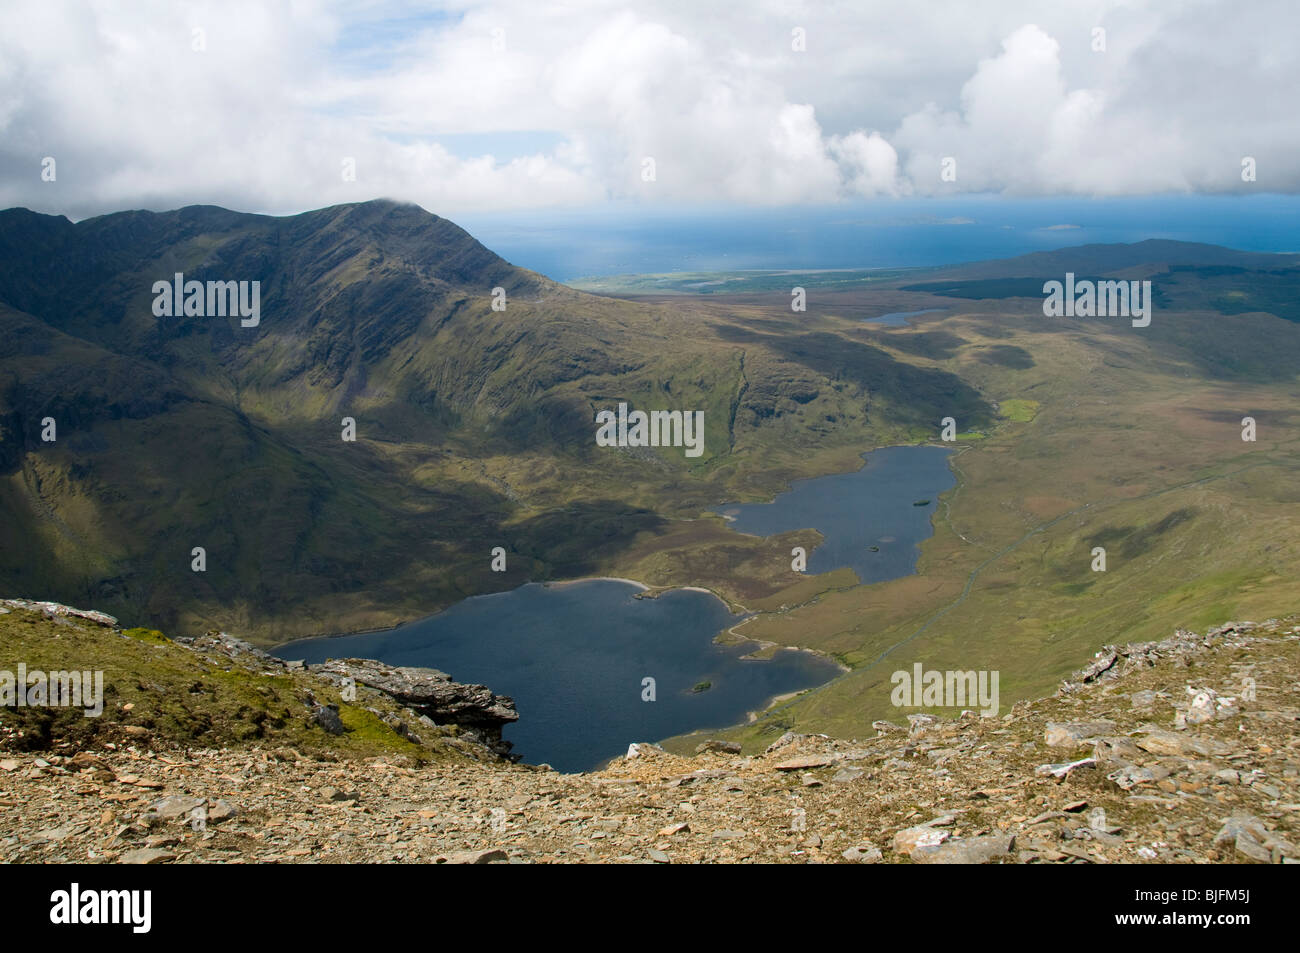 Monte Mweelrea oltre Doo Lough pass, dalle montagne Sheeffry west top, County Mayo, Irlanda Foto Stock